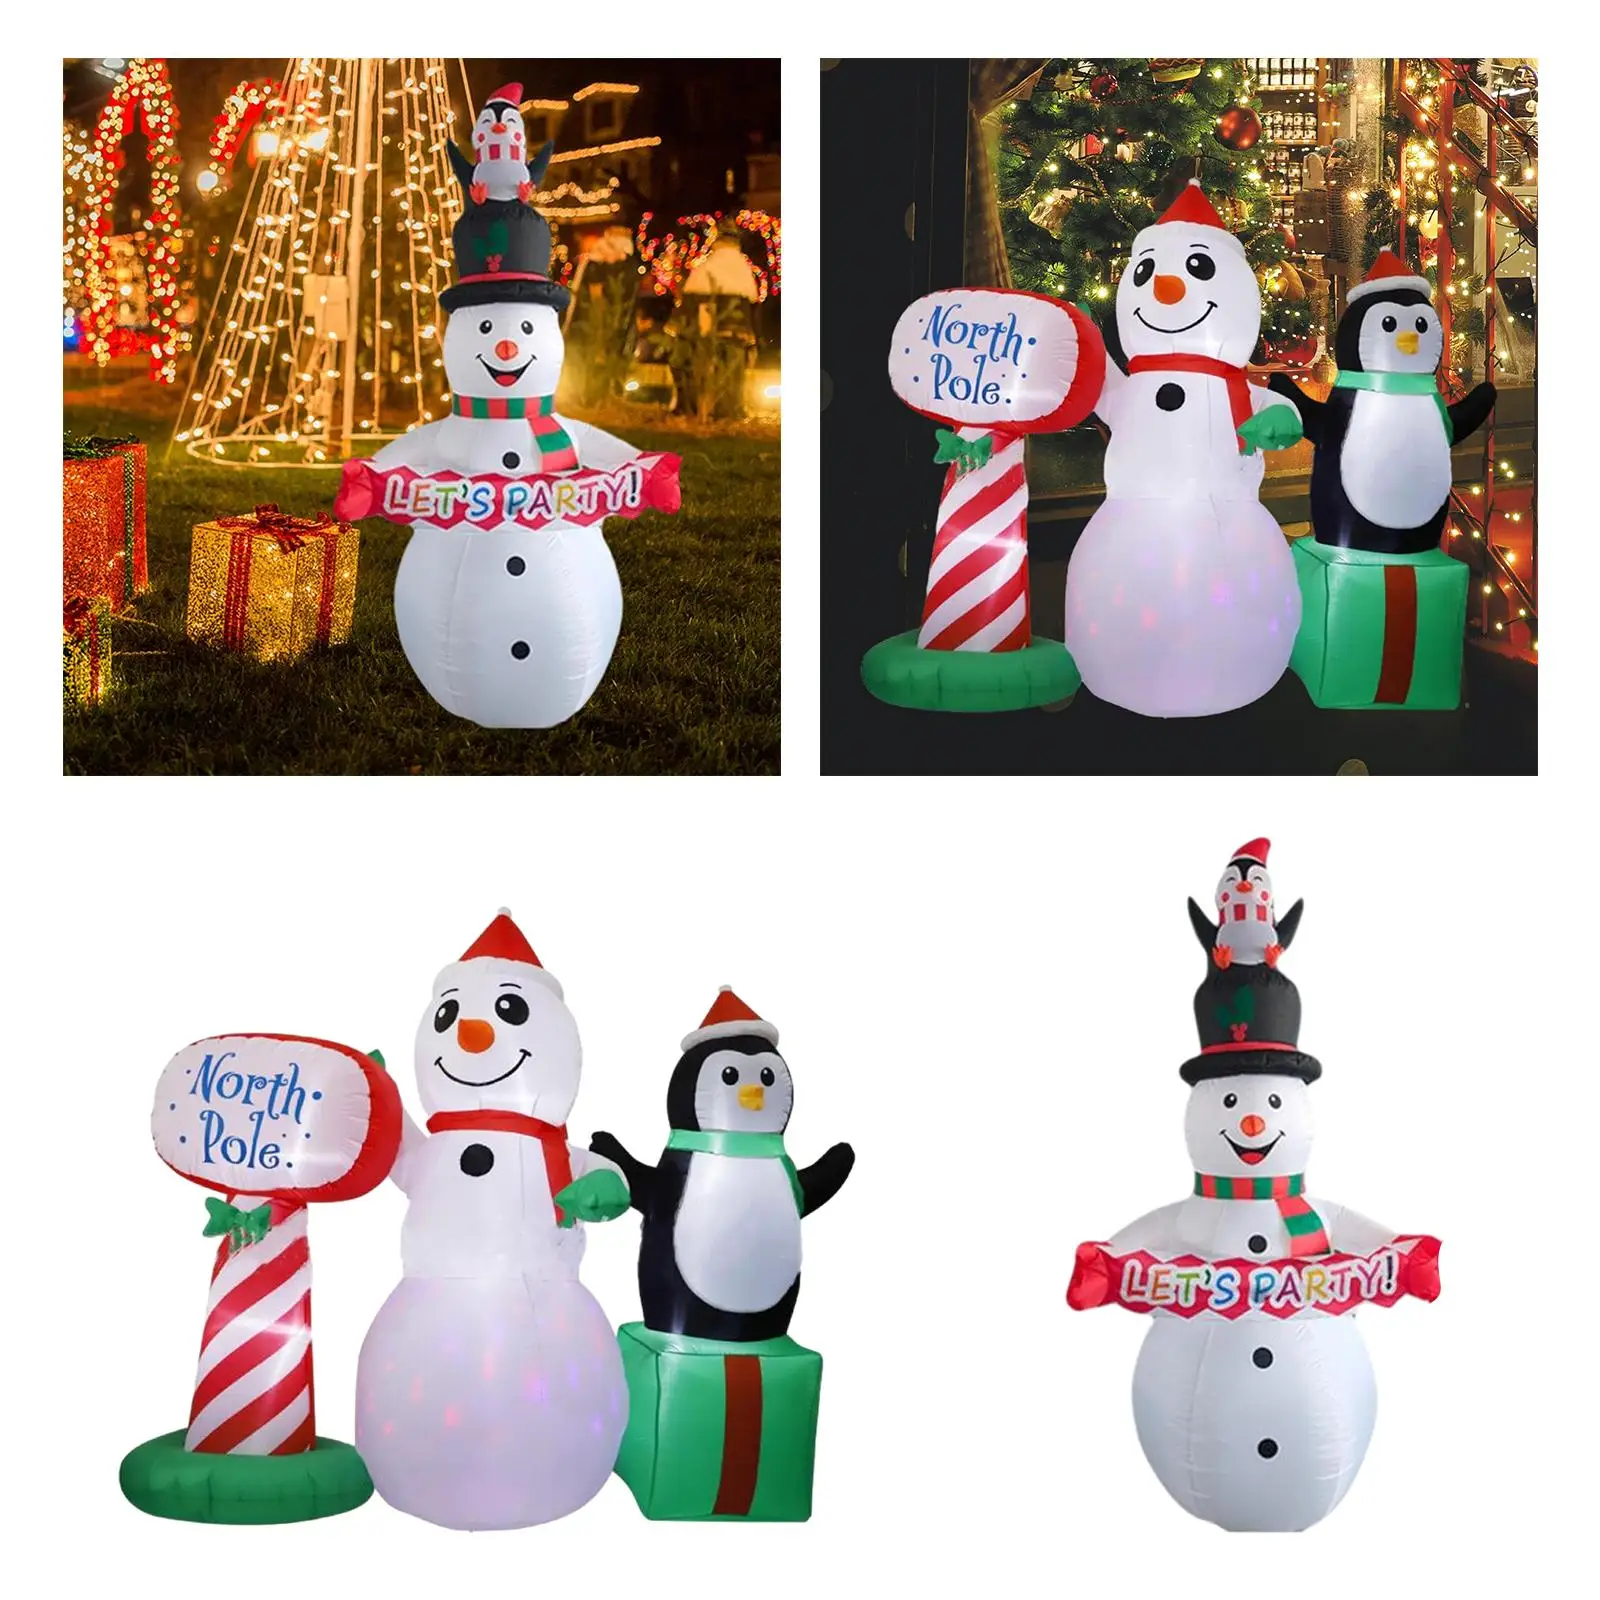 Inflatable Snowman Ornament Funny with LED Lights Weatherproof Props Large Blow up Snow Man for Lawn Winter Holiday Patio Indoor